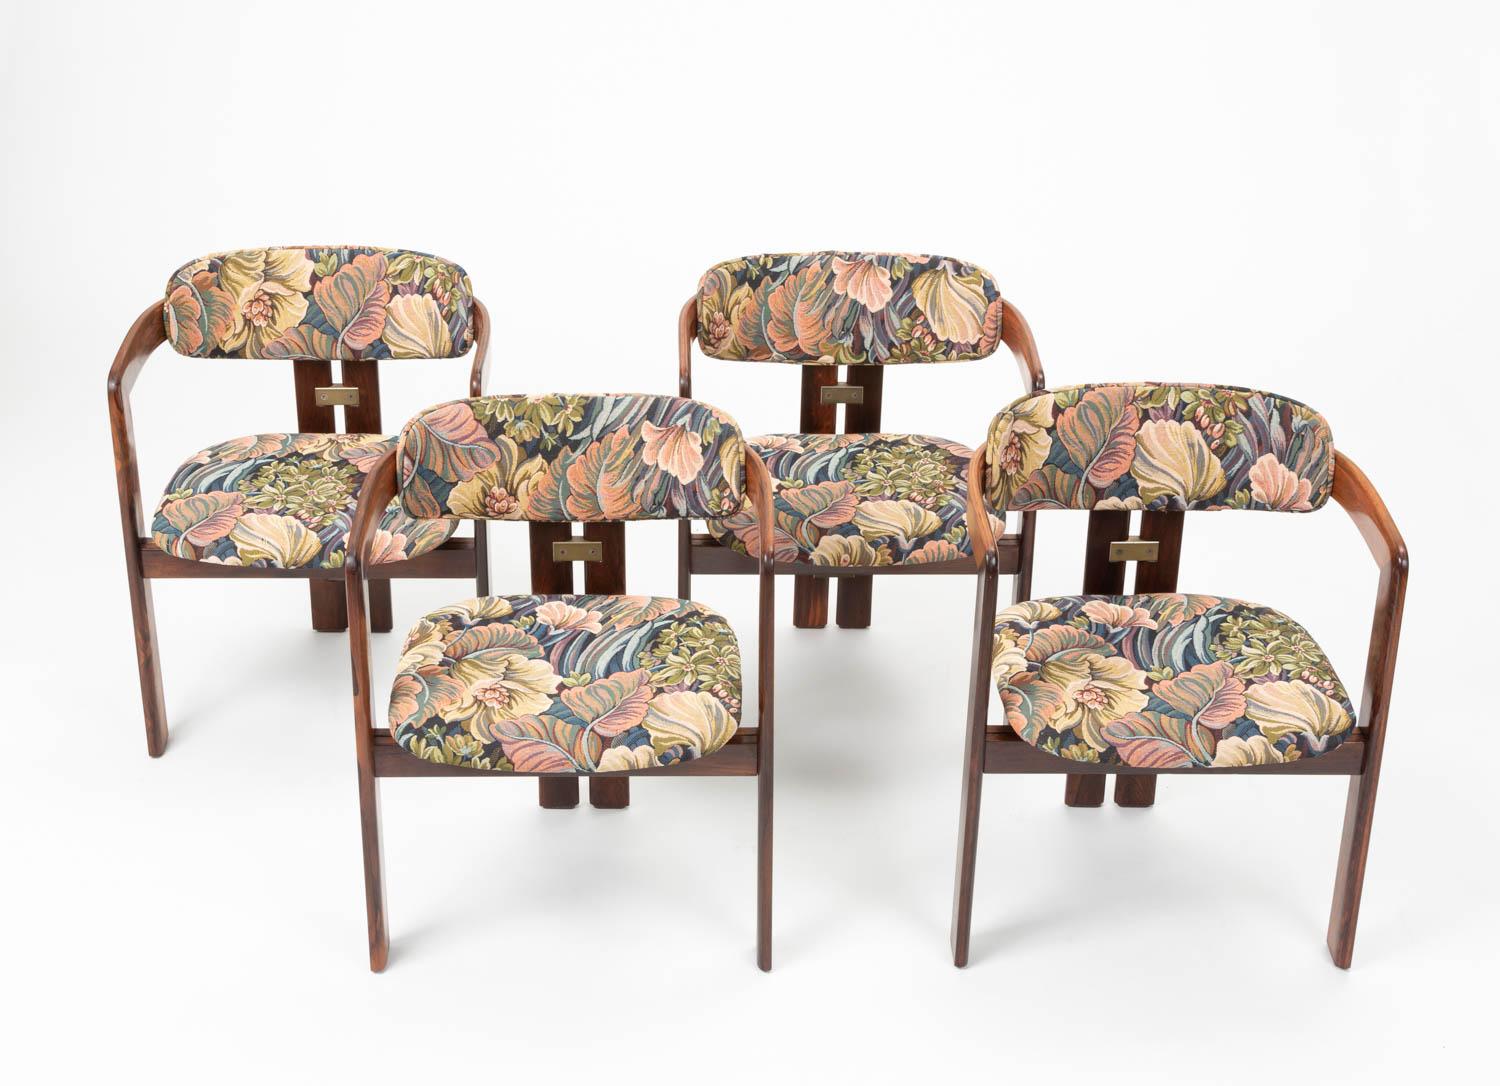 Set of four Augusto Savini 'Pamplona' rosewood dining room chairs. The 1965 design was produced by the Italian brand Pozzi. The chairs are upholstered in a playful floral/plant leaf fabric and aluminum elements accent the minimalist frame. This